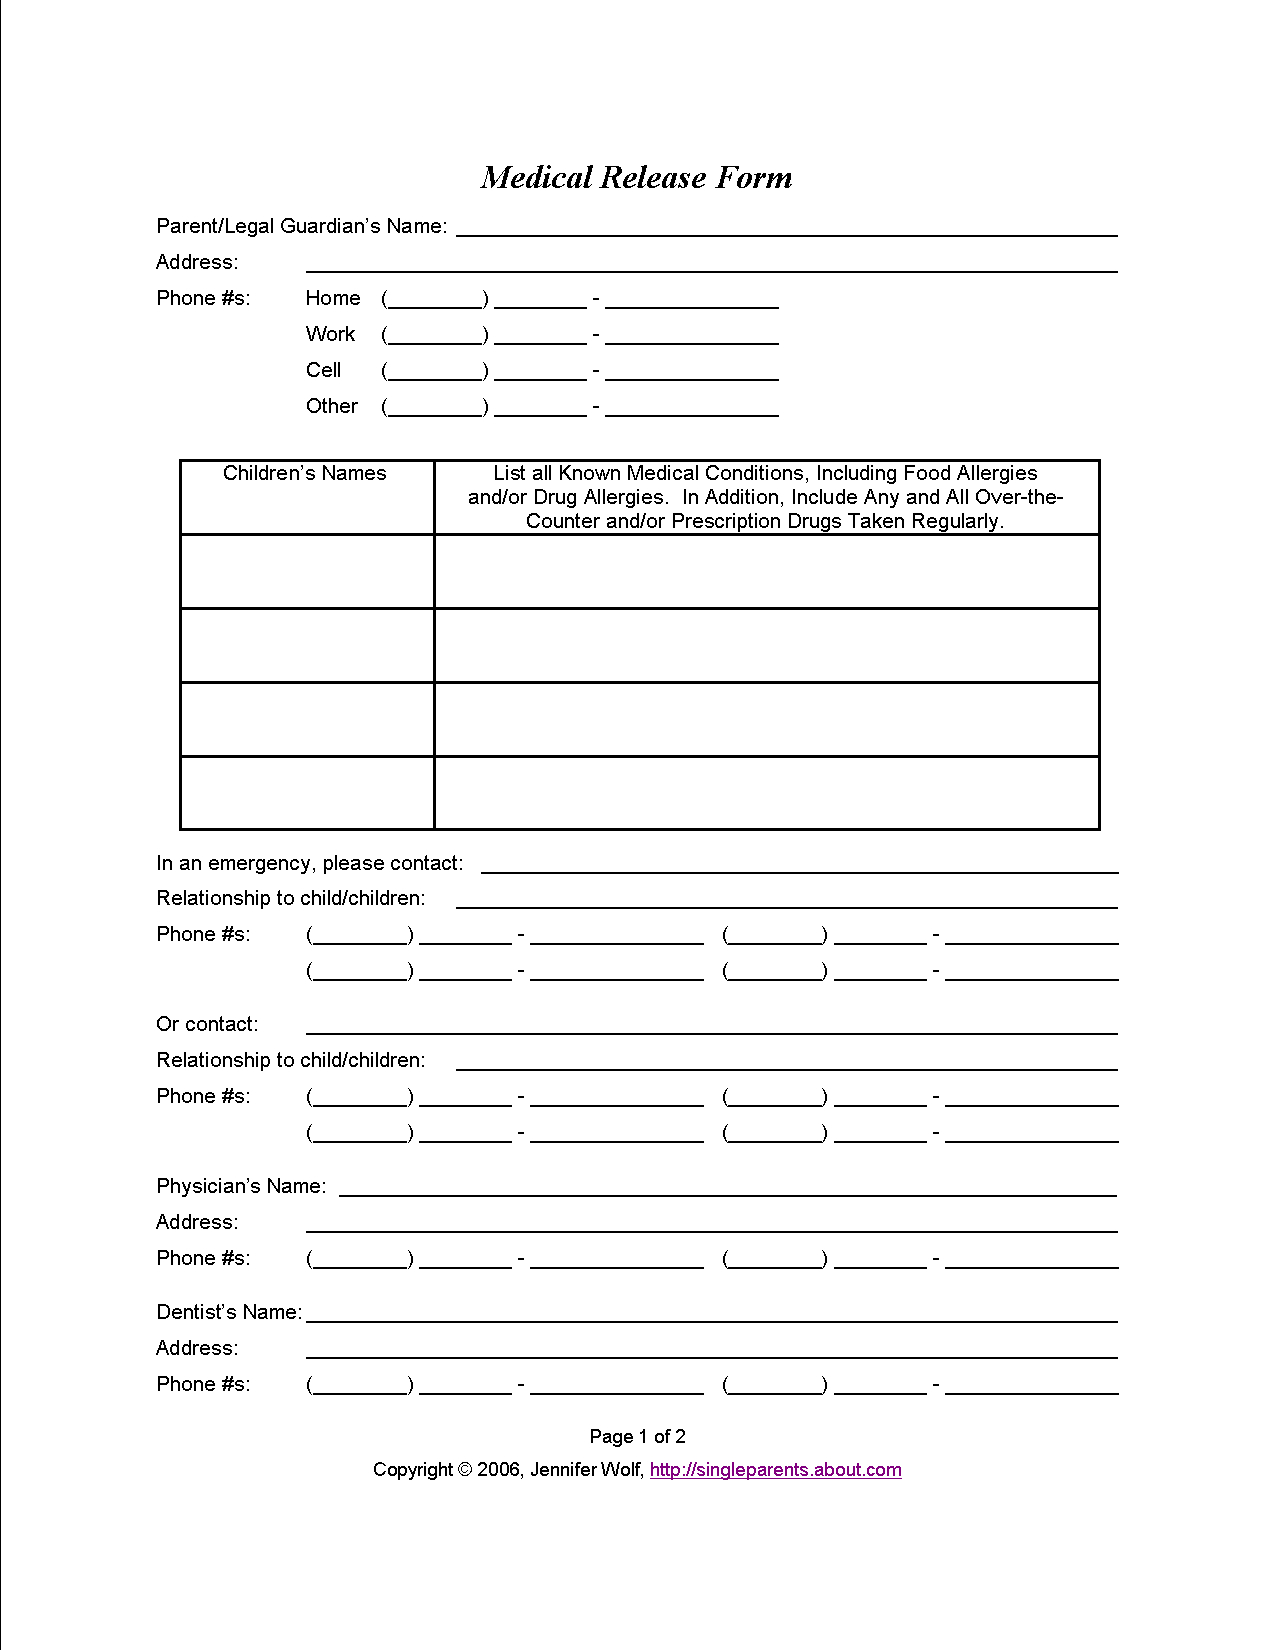 Do You Have A Medical Release Form For Your Kids? | Travel - Free Printable Medical Forms Kit